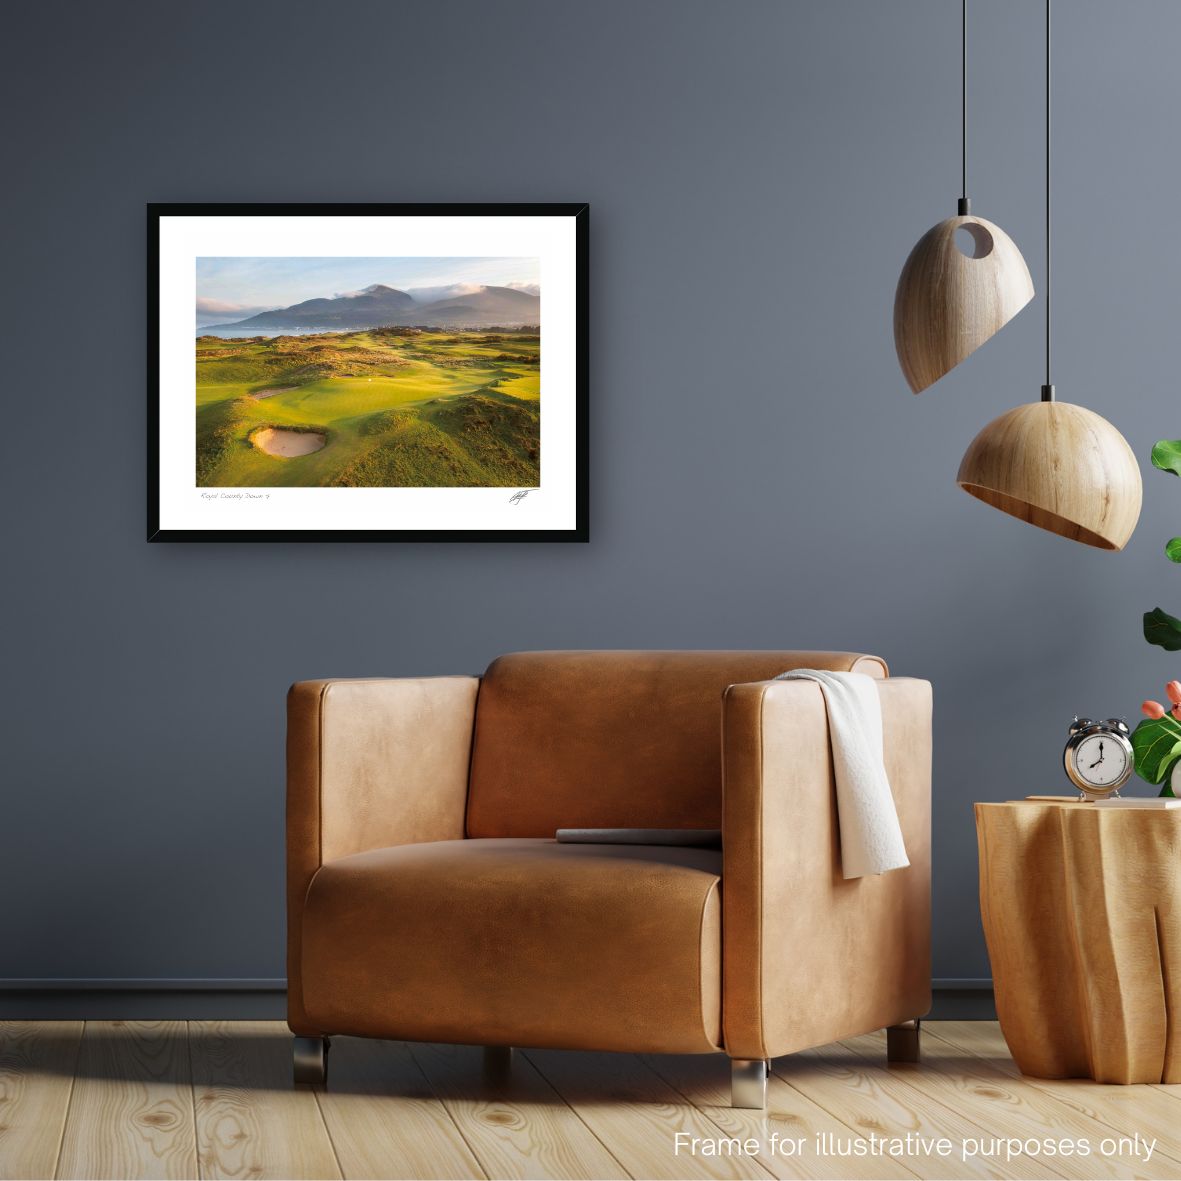 ROYAL COUNTY DOWN HOLE 7 FRAMED PHOTOGRAPHY PRINT BY ADAM TOTH